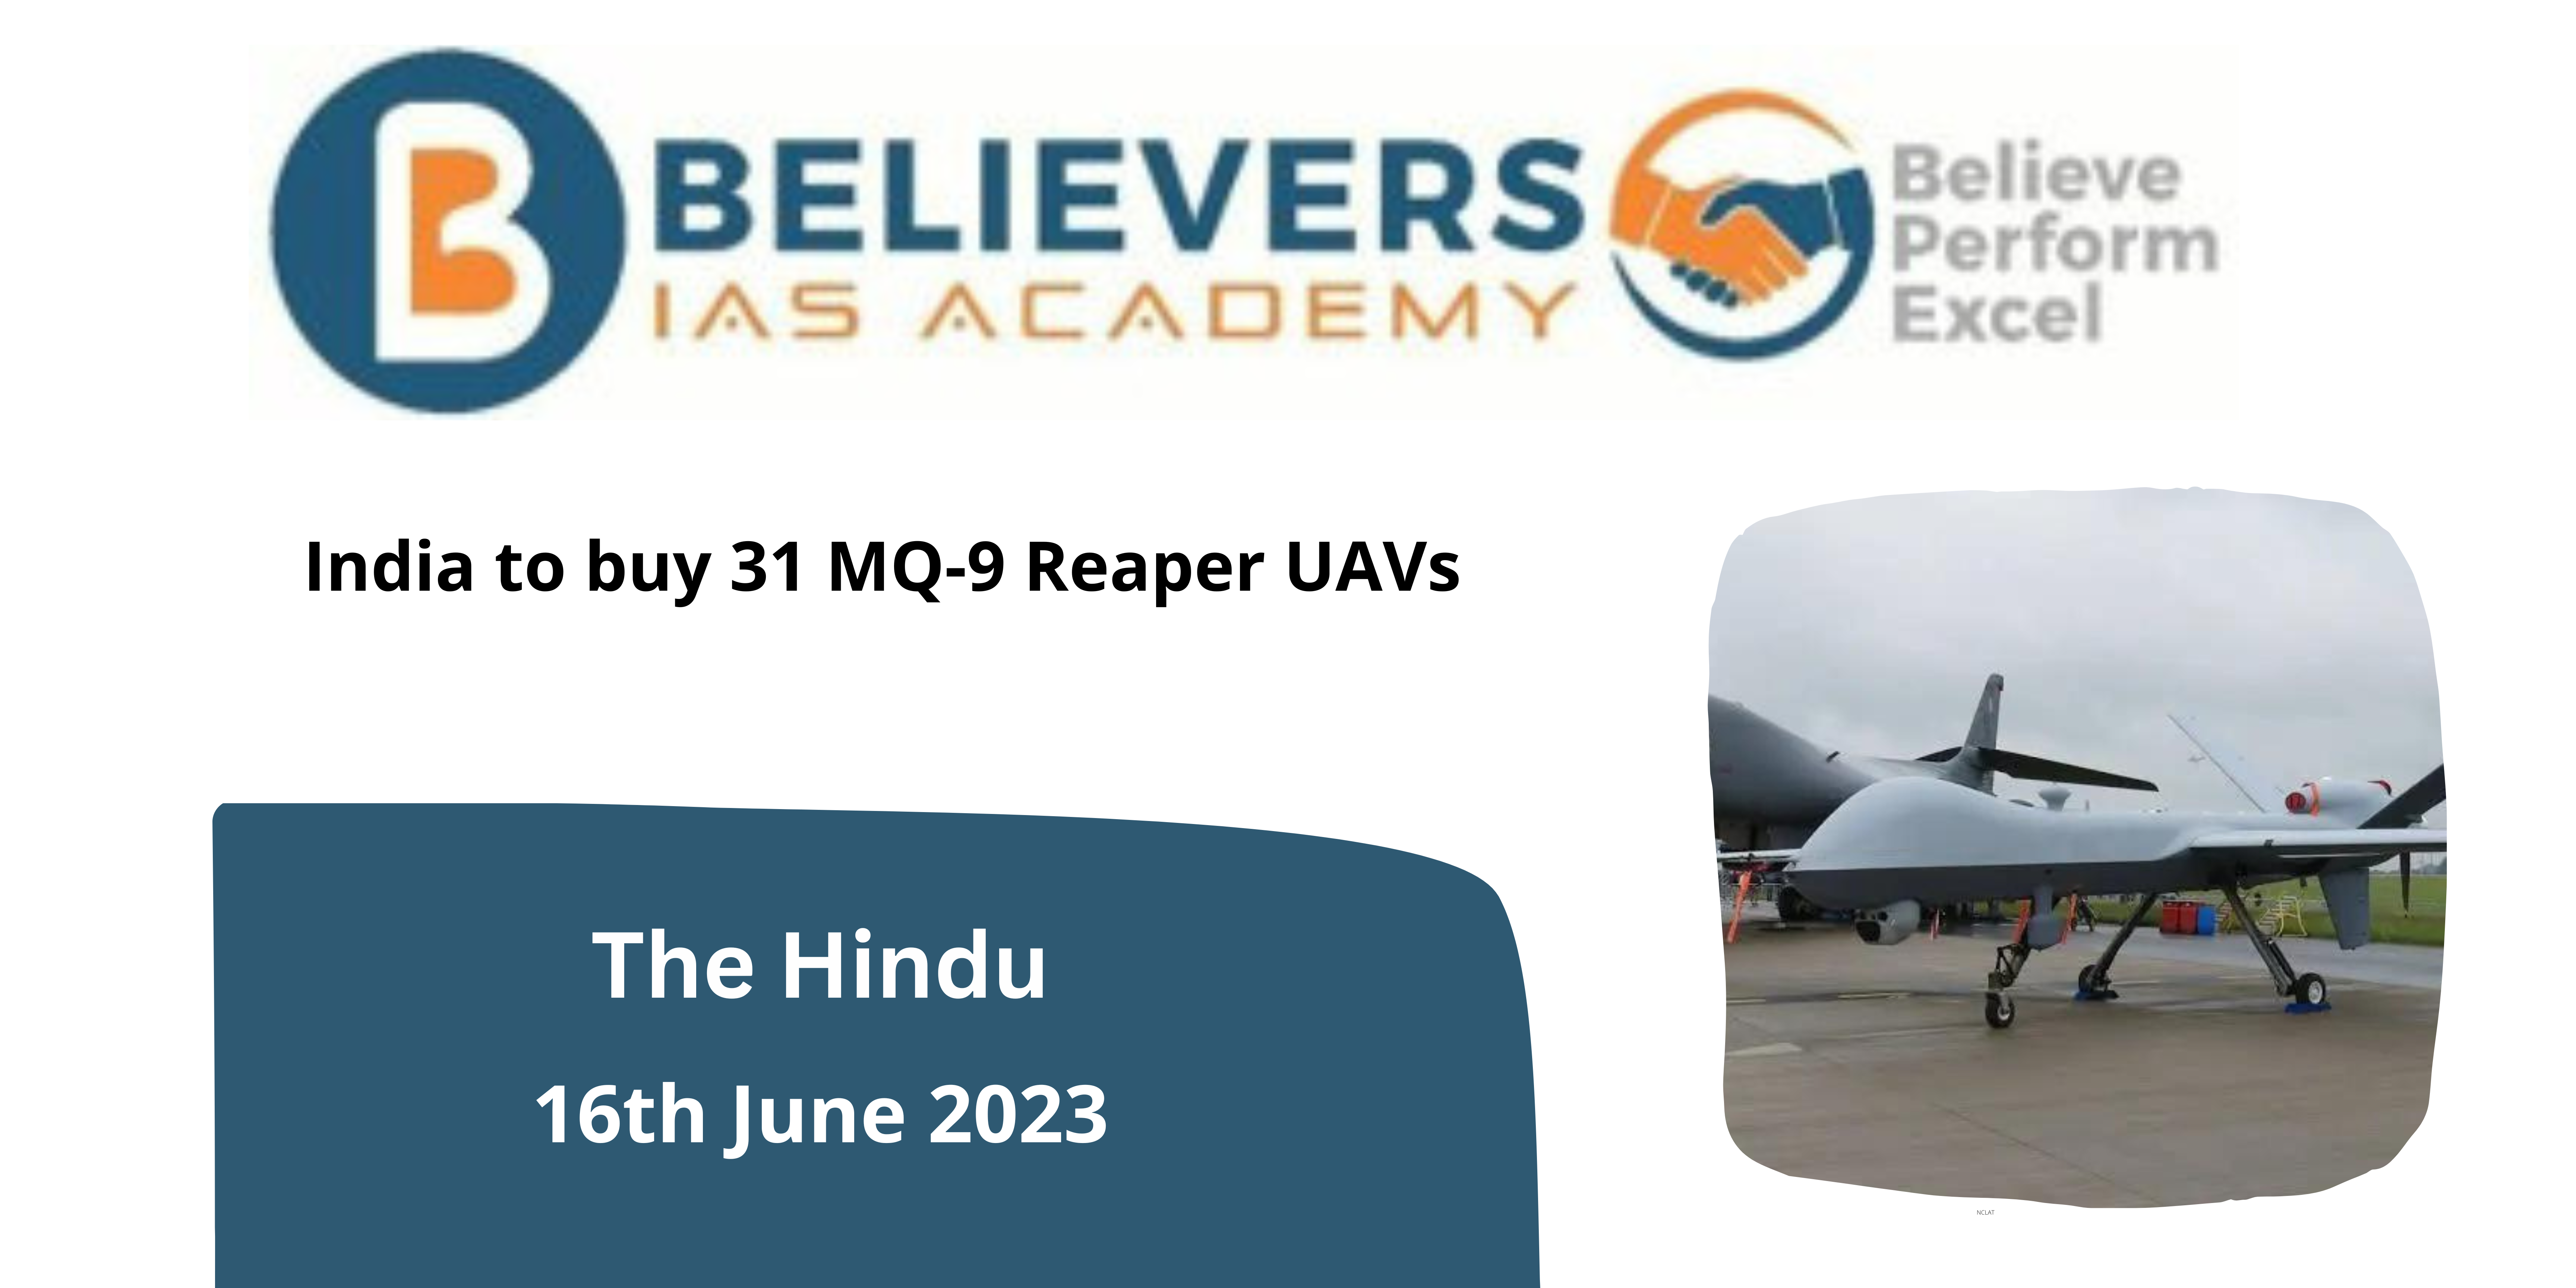 India to buy 31 MQ-9 Reaper UAVs